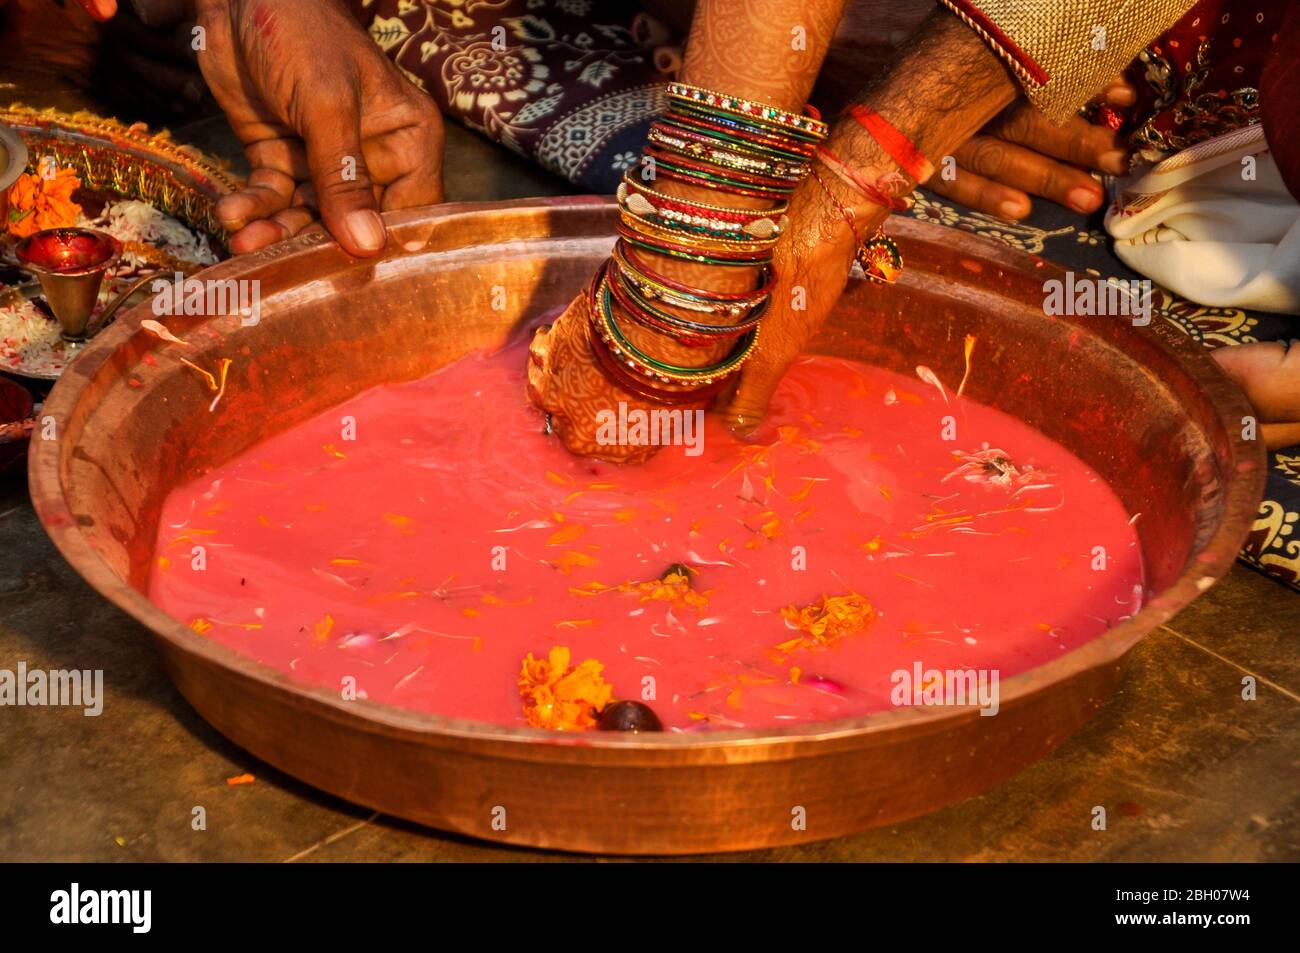 Indian wedding traditional game searching for ring in milk Plate, Indian marriage traditions Stock Photo